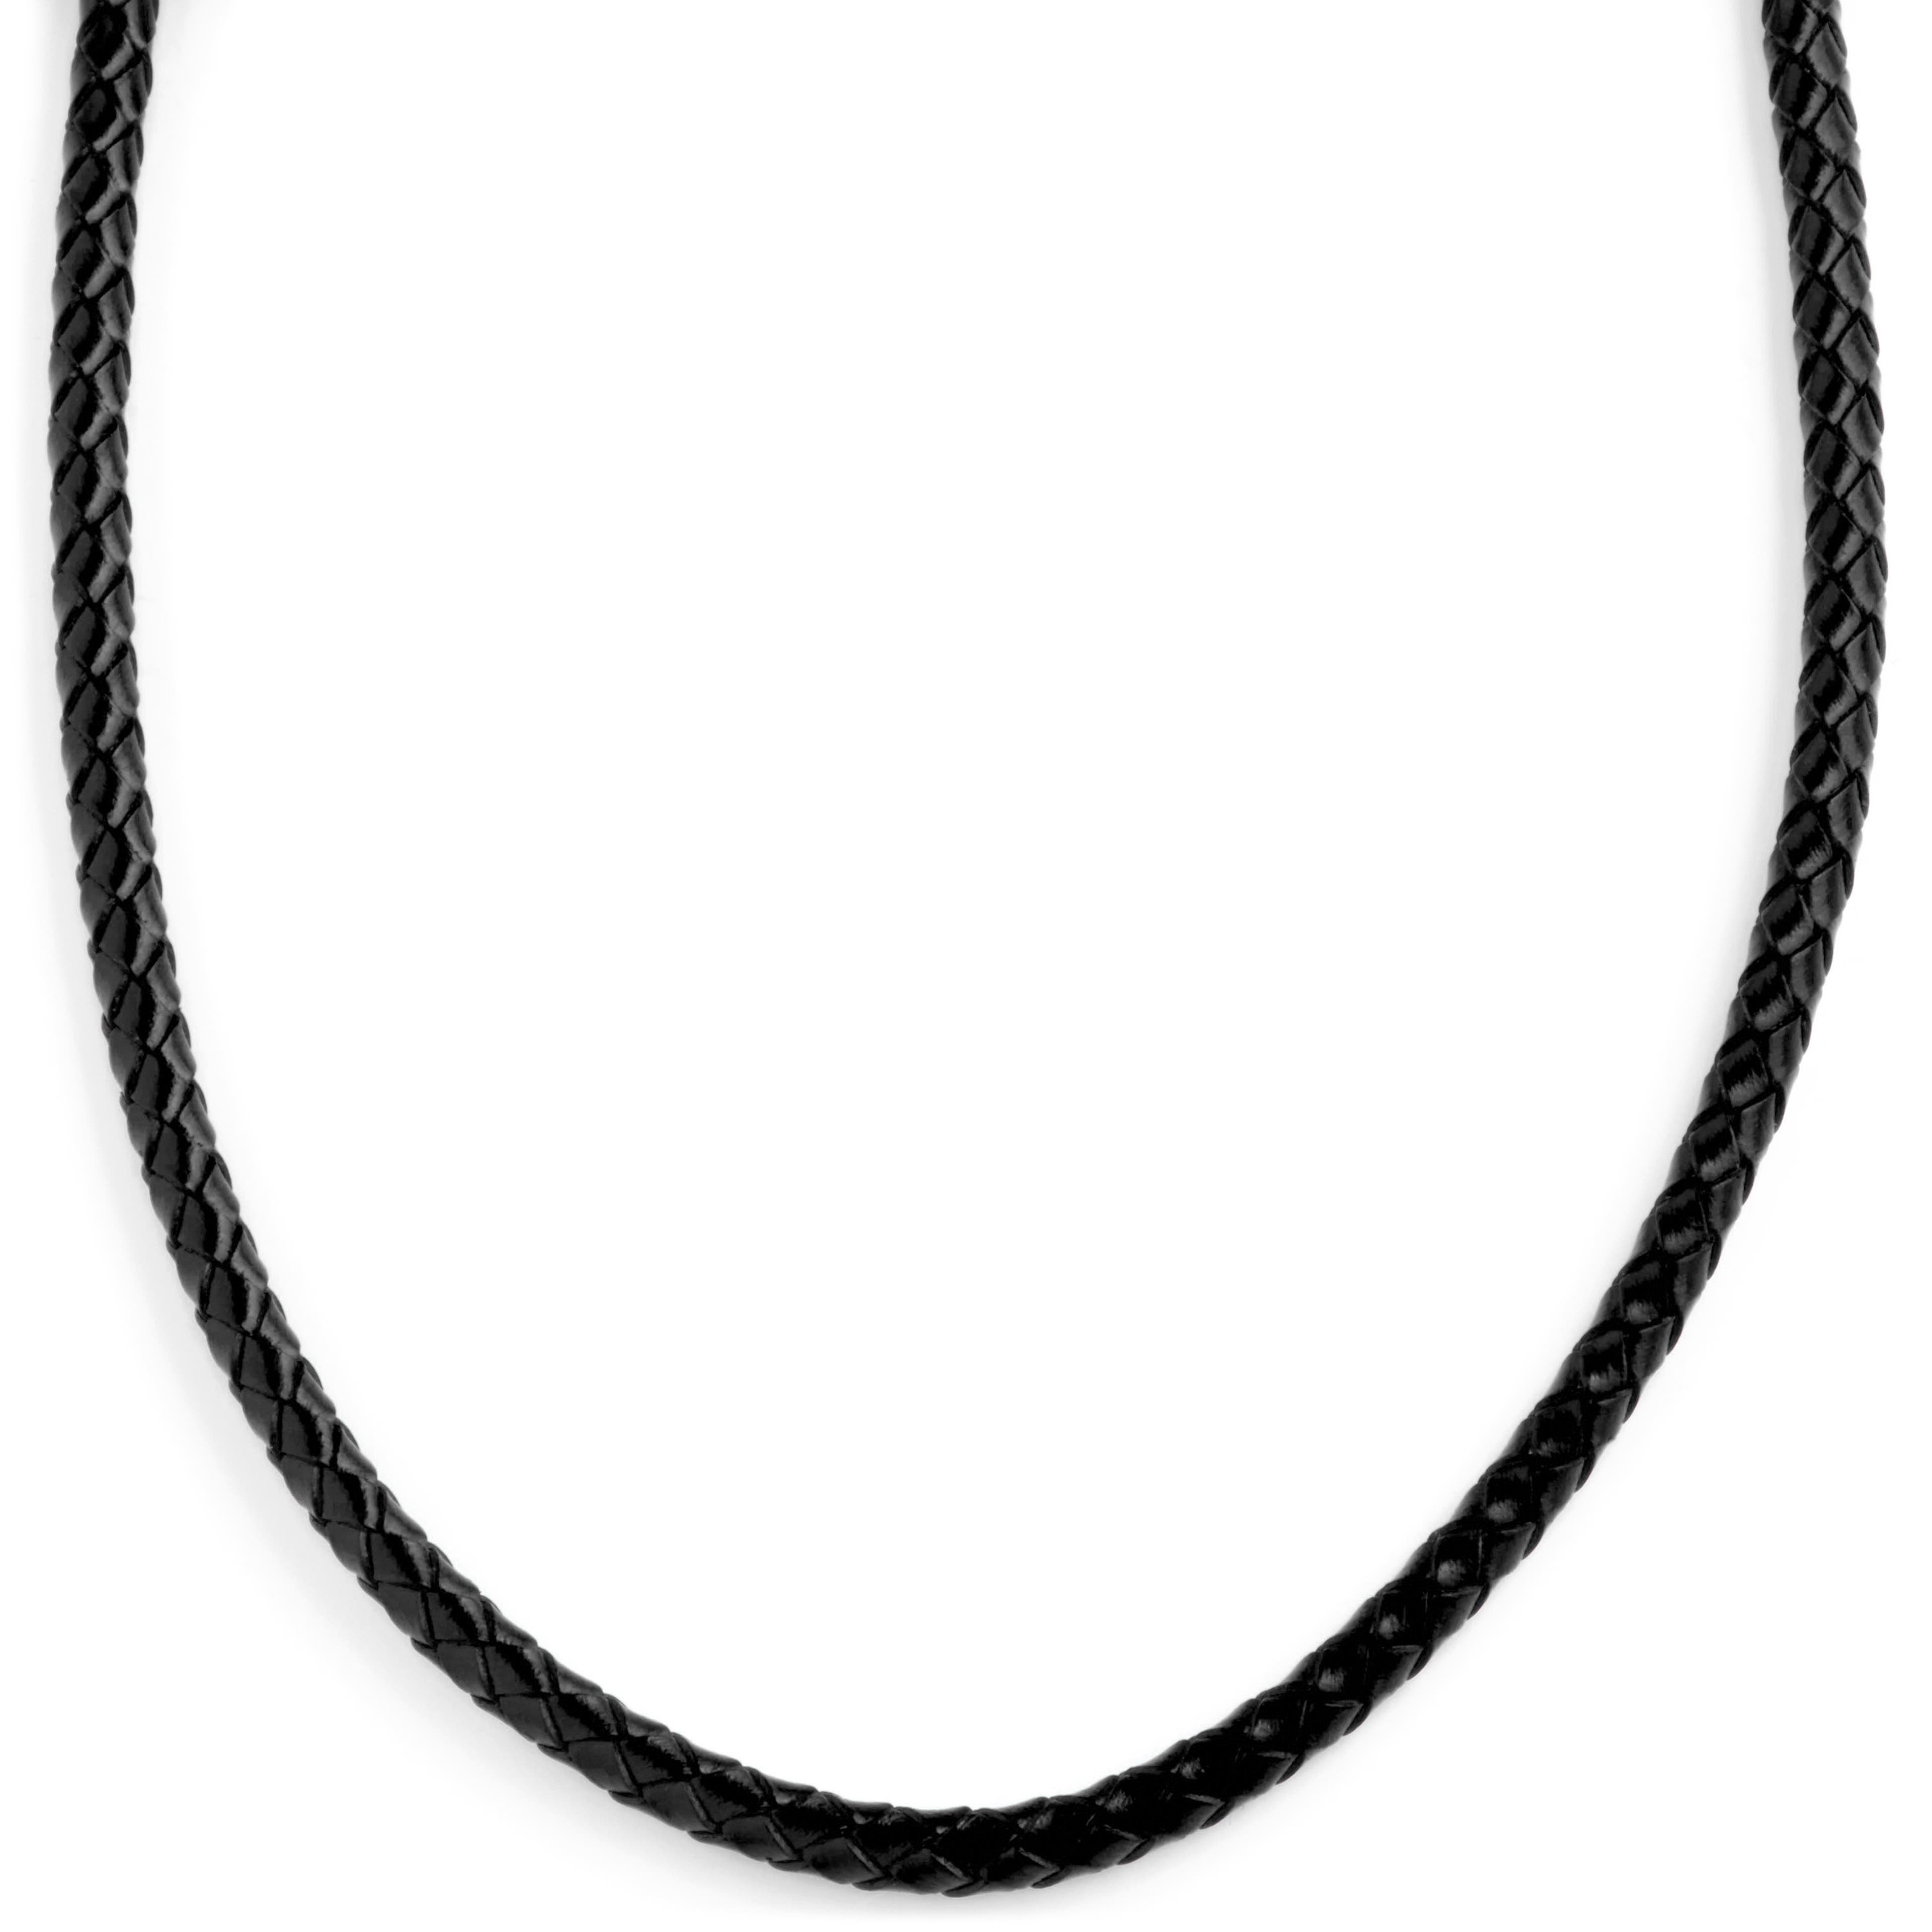 5mm Black Woven Leather necklace